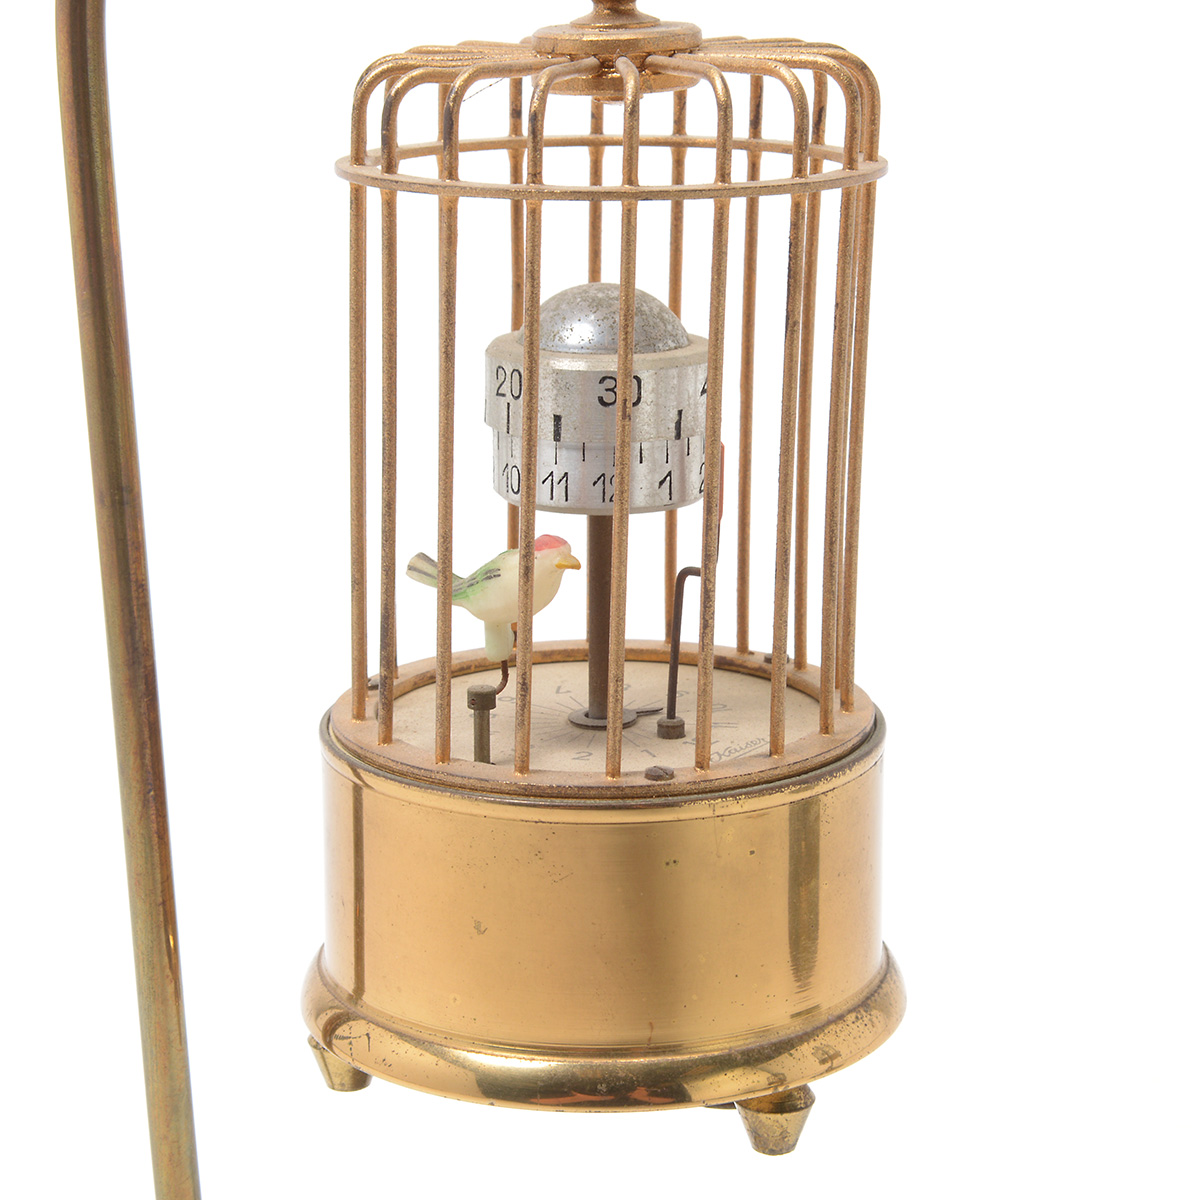 Three Hanging Birdcage Music Boxes with Clock Mechanism - Image 5 of 13